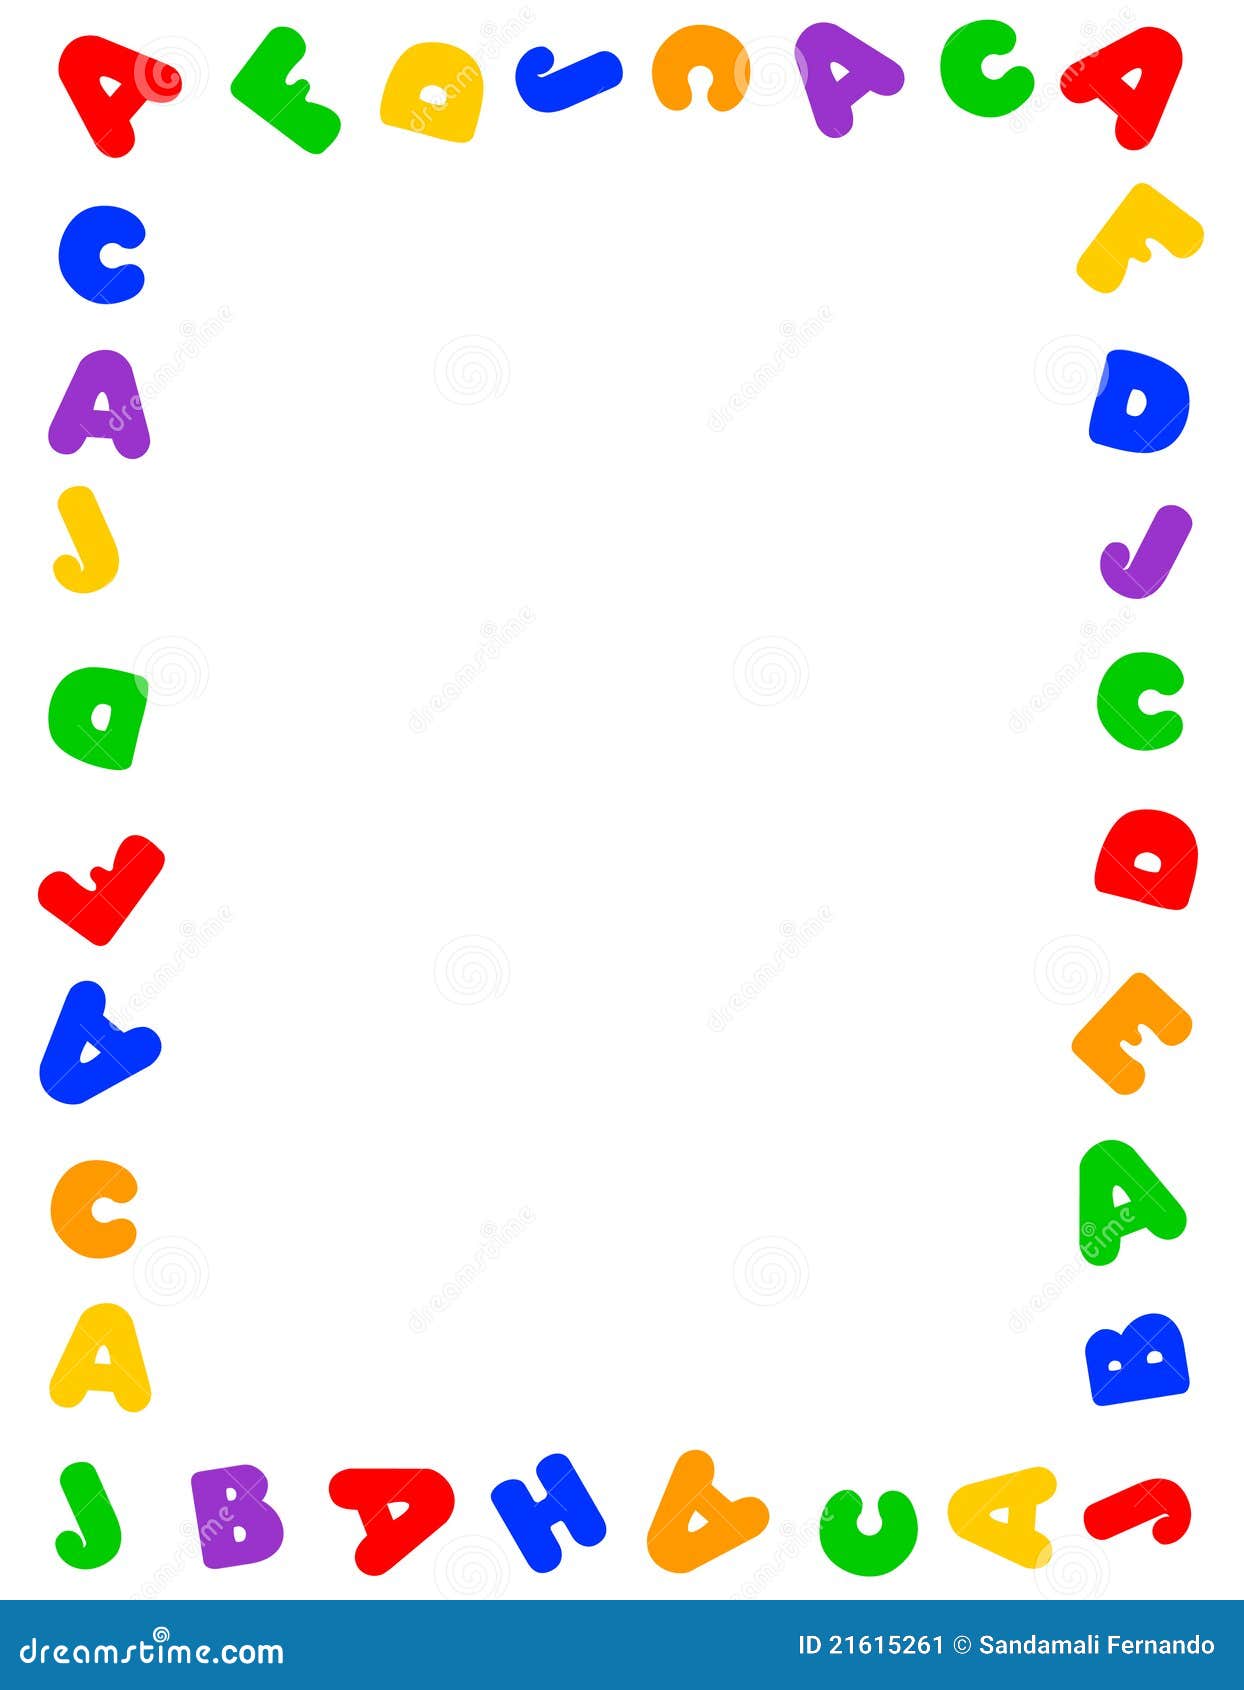 Alphabet border stock vector. Image of back, separated ...